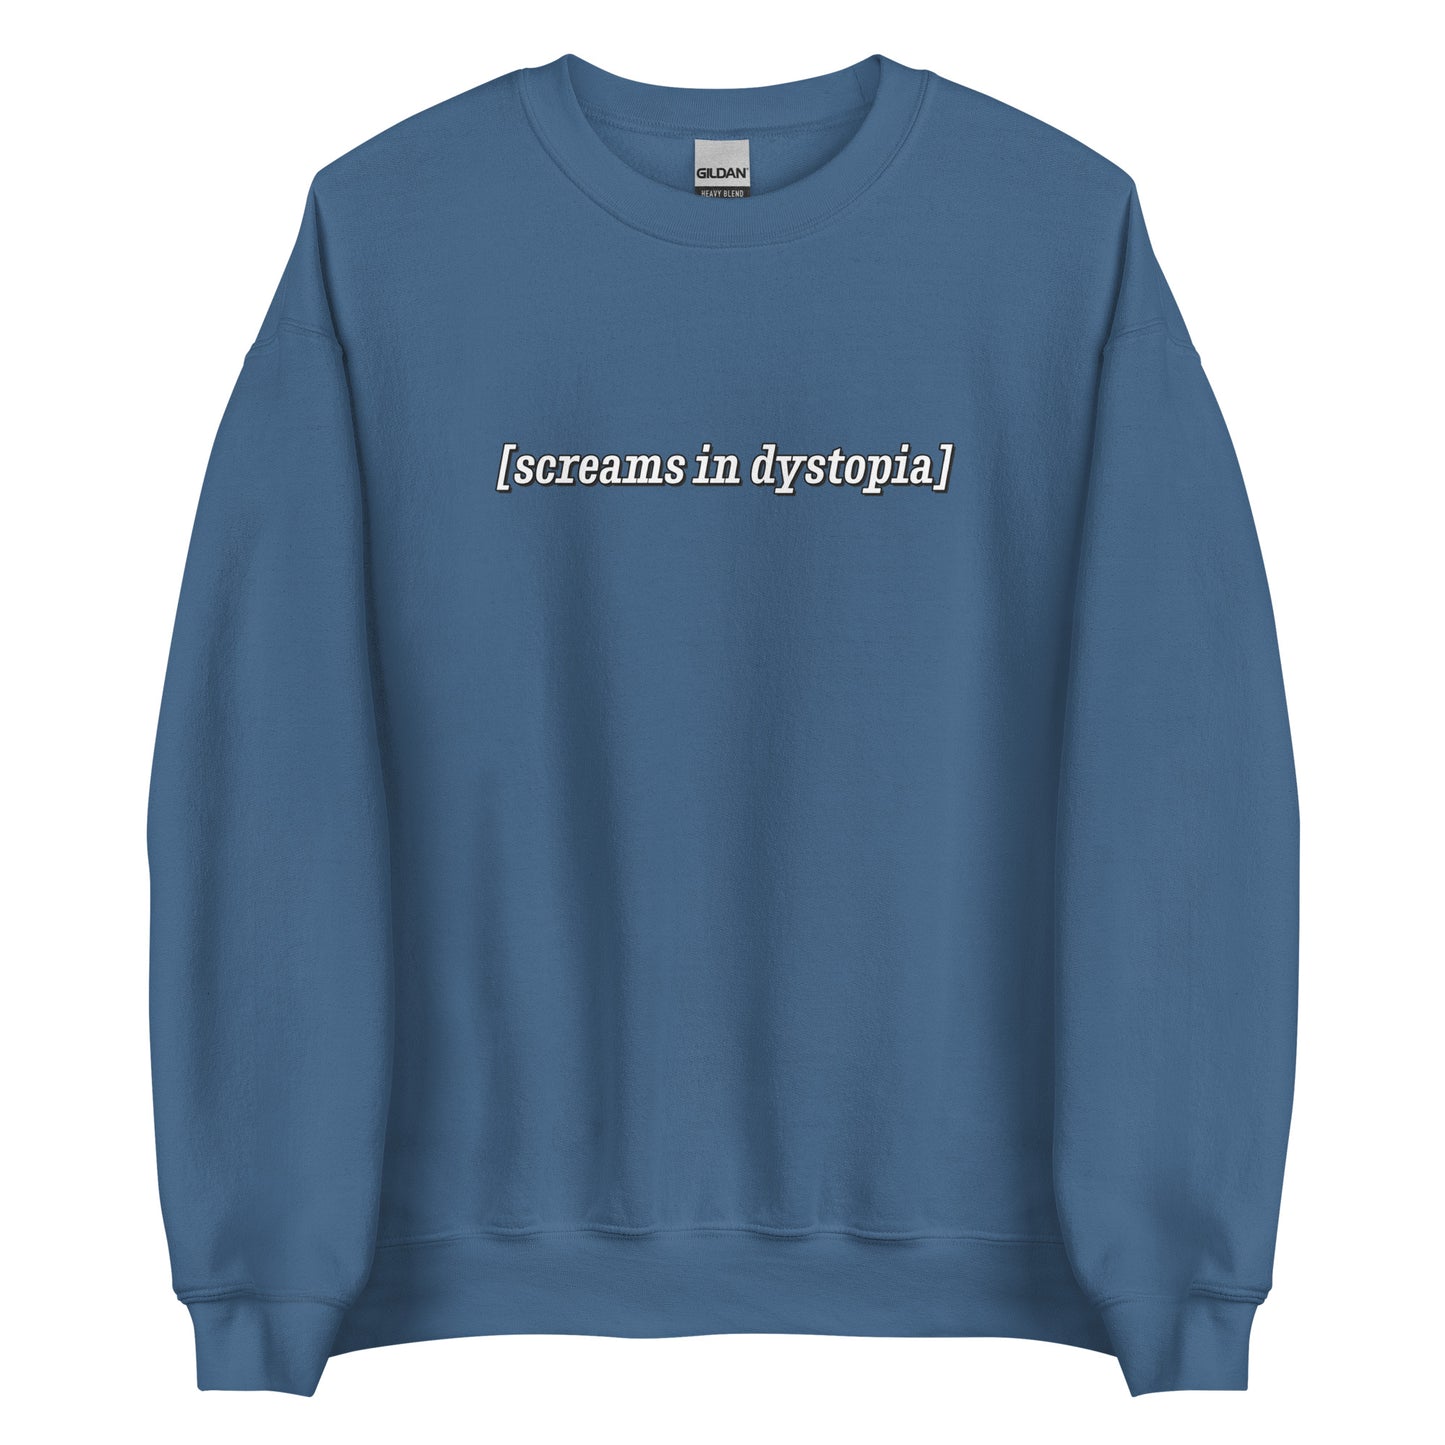 A blue crewneck sweatshirt with white text in the style of subtitles. The text reads "[screams in dystopia]".